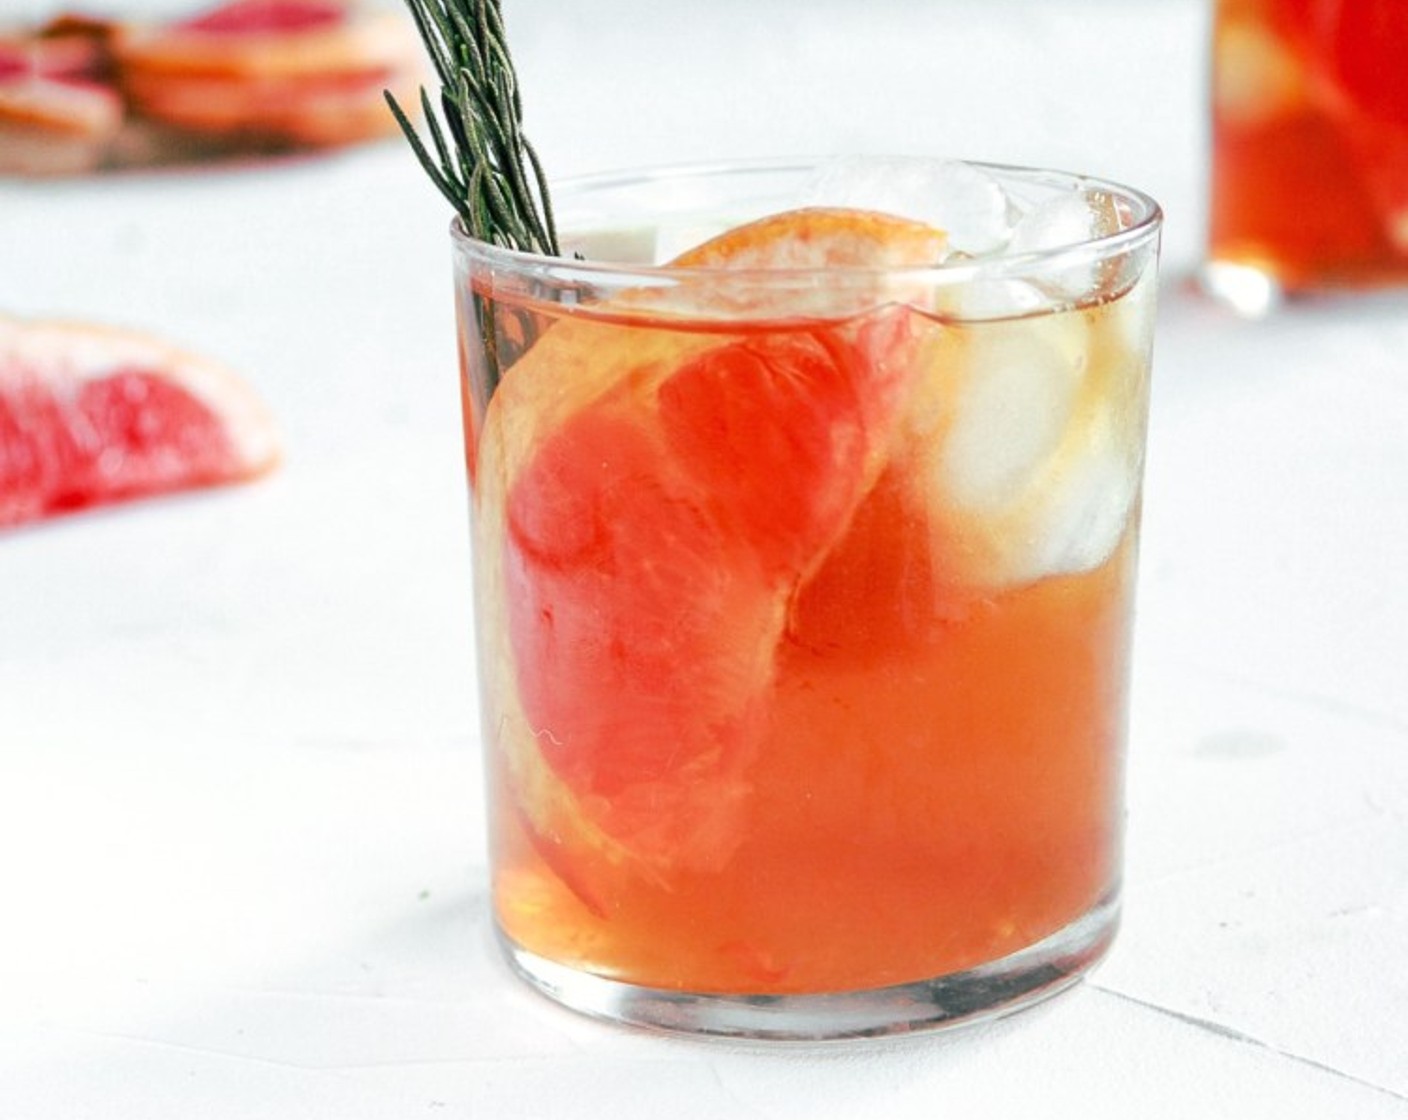 step 5 Optionally, add 1/2 oz of grapefruit juice to the drink to add a little tartness and garnish with Fresh Rosemary (to taste) and/or grapefruit slices.